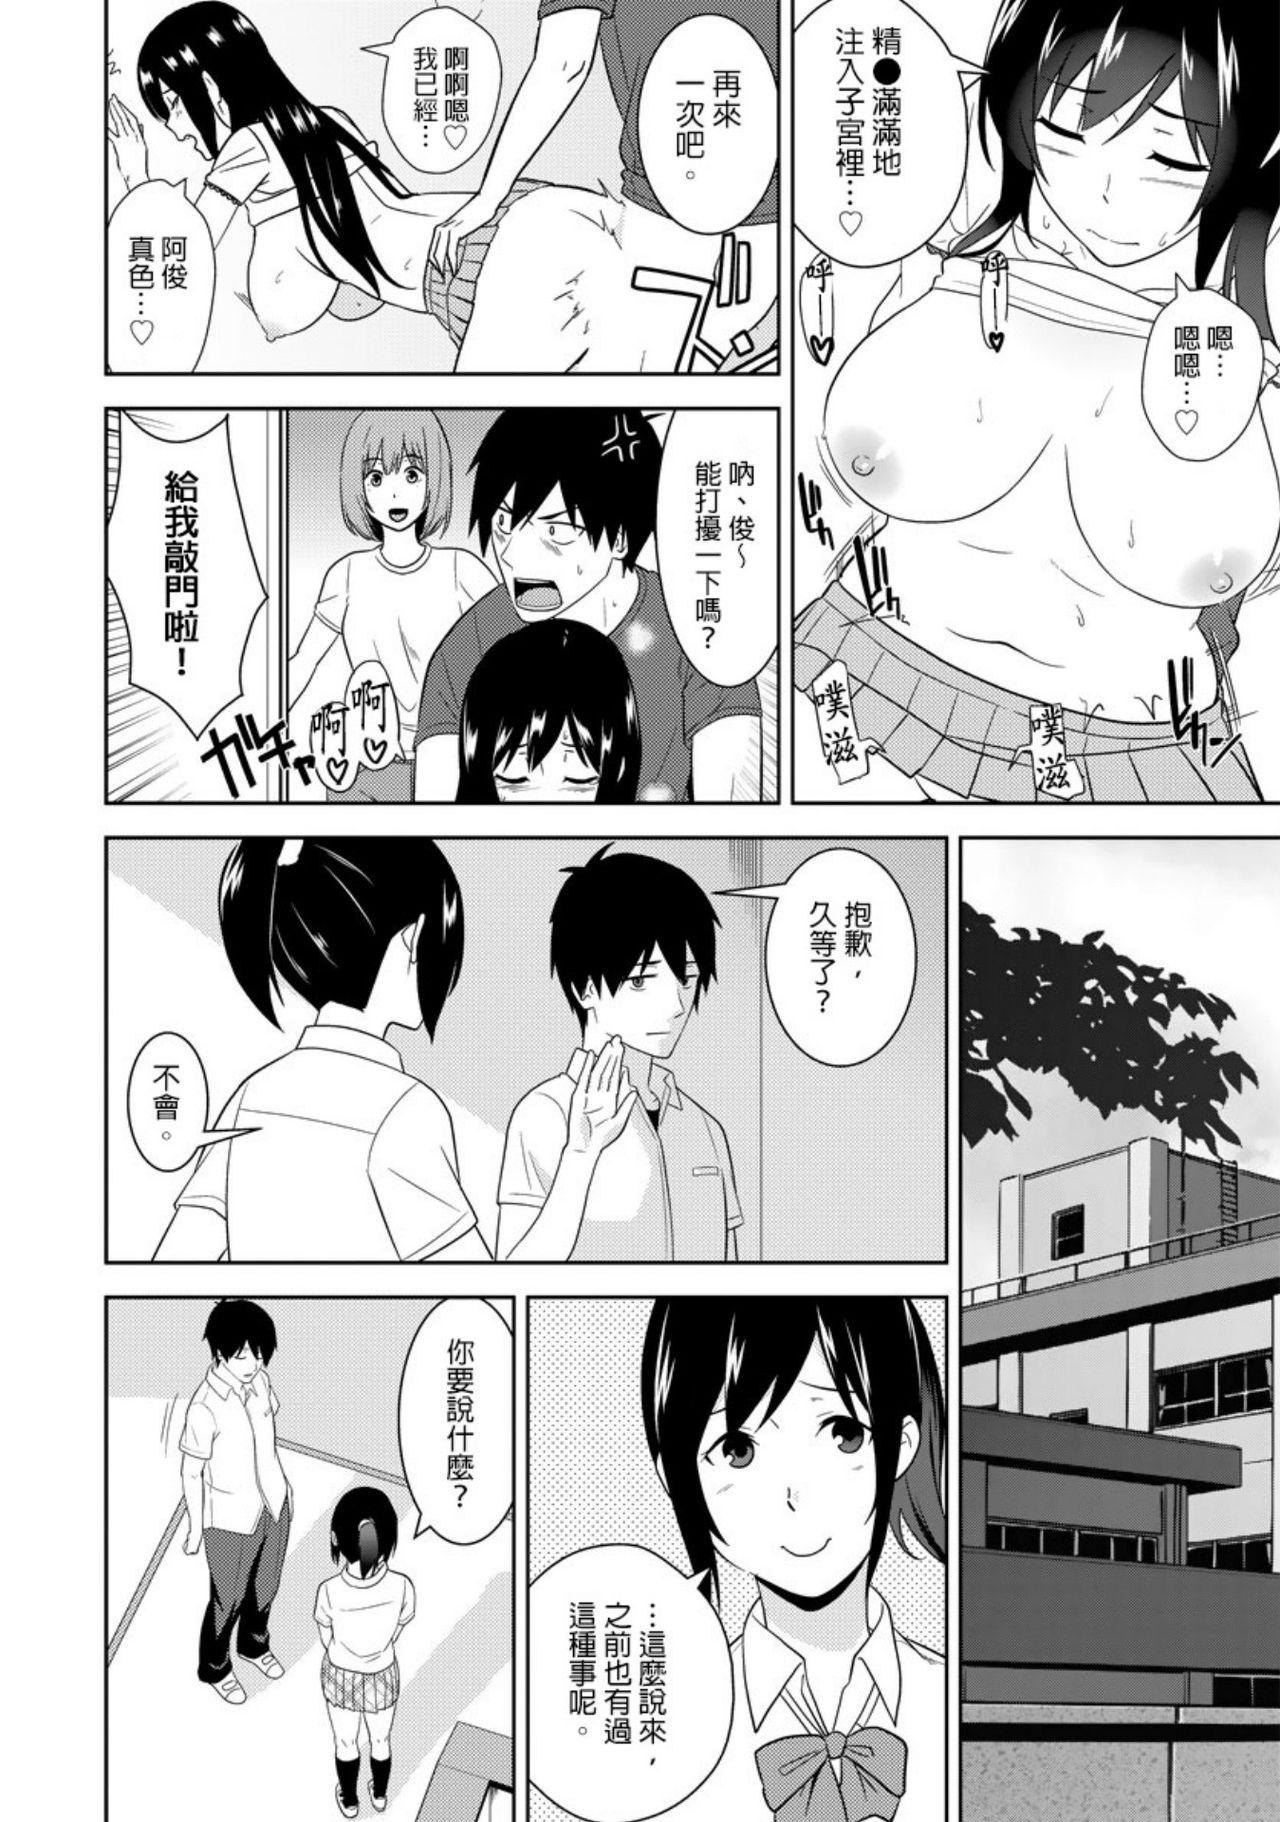 Lez Fuck 教え子に襲ワレル人妻は抵抗できなくて Ch.10 Fit - Page 9